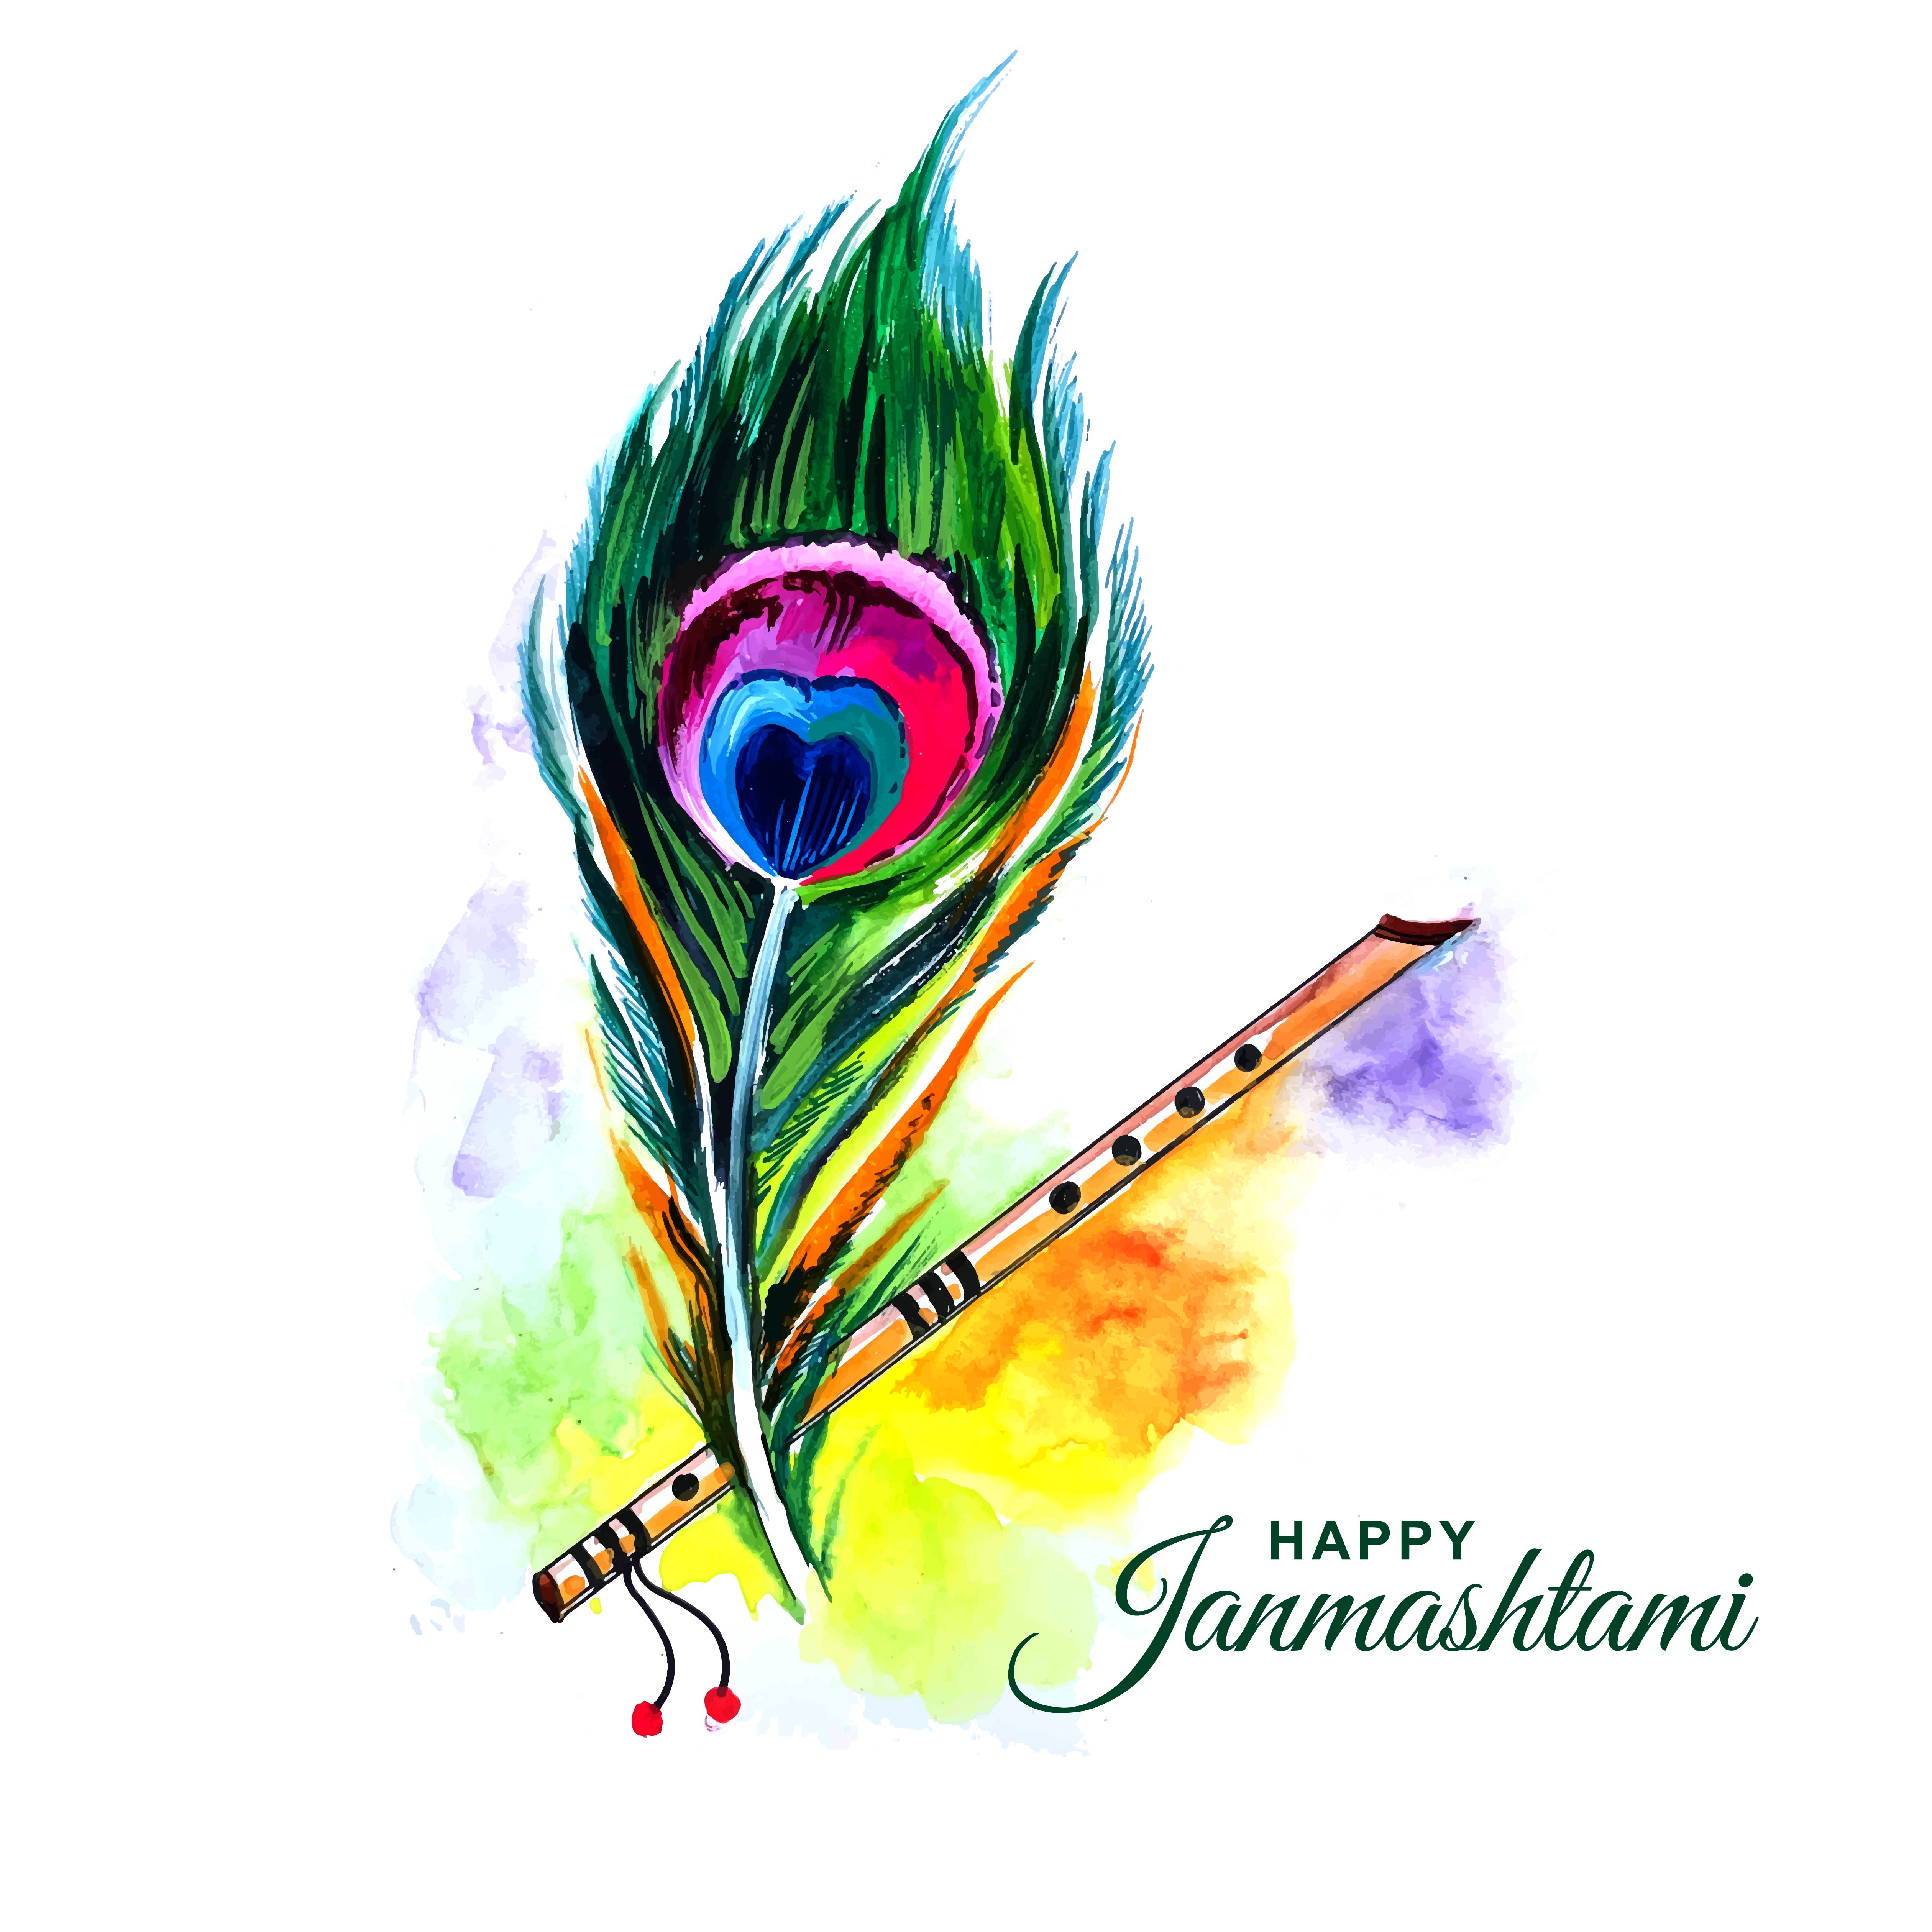 Peacock Feather Image With Krishna